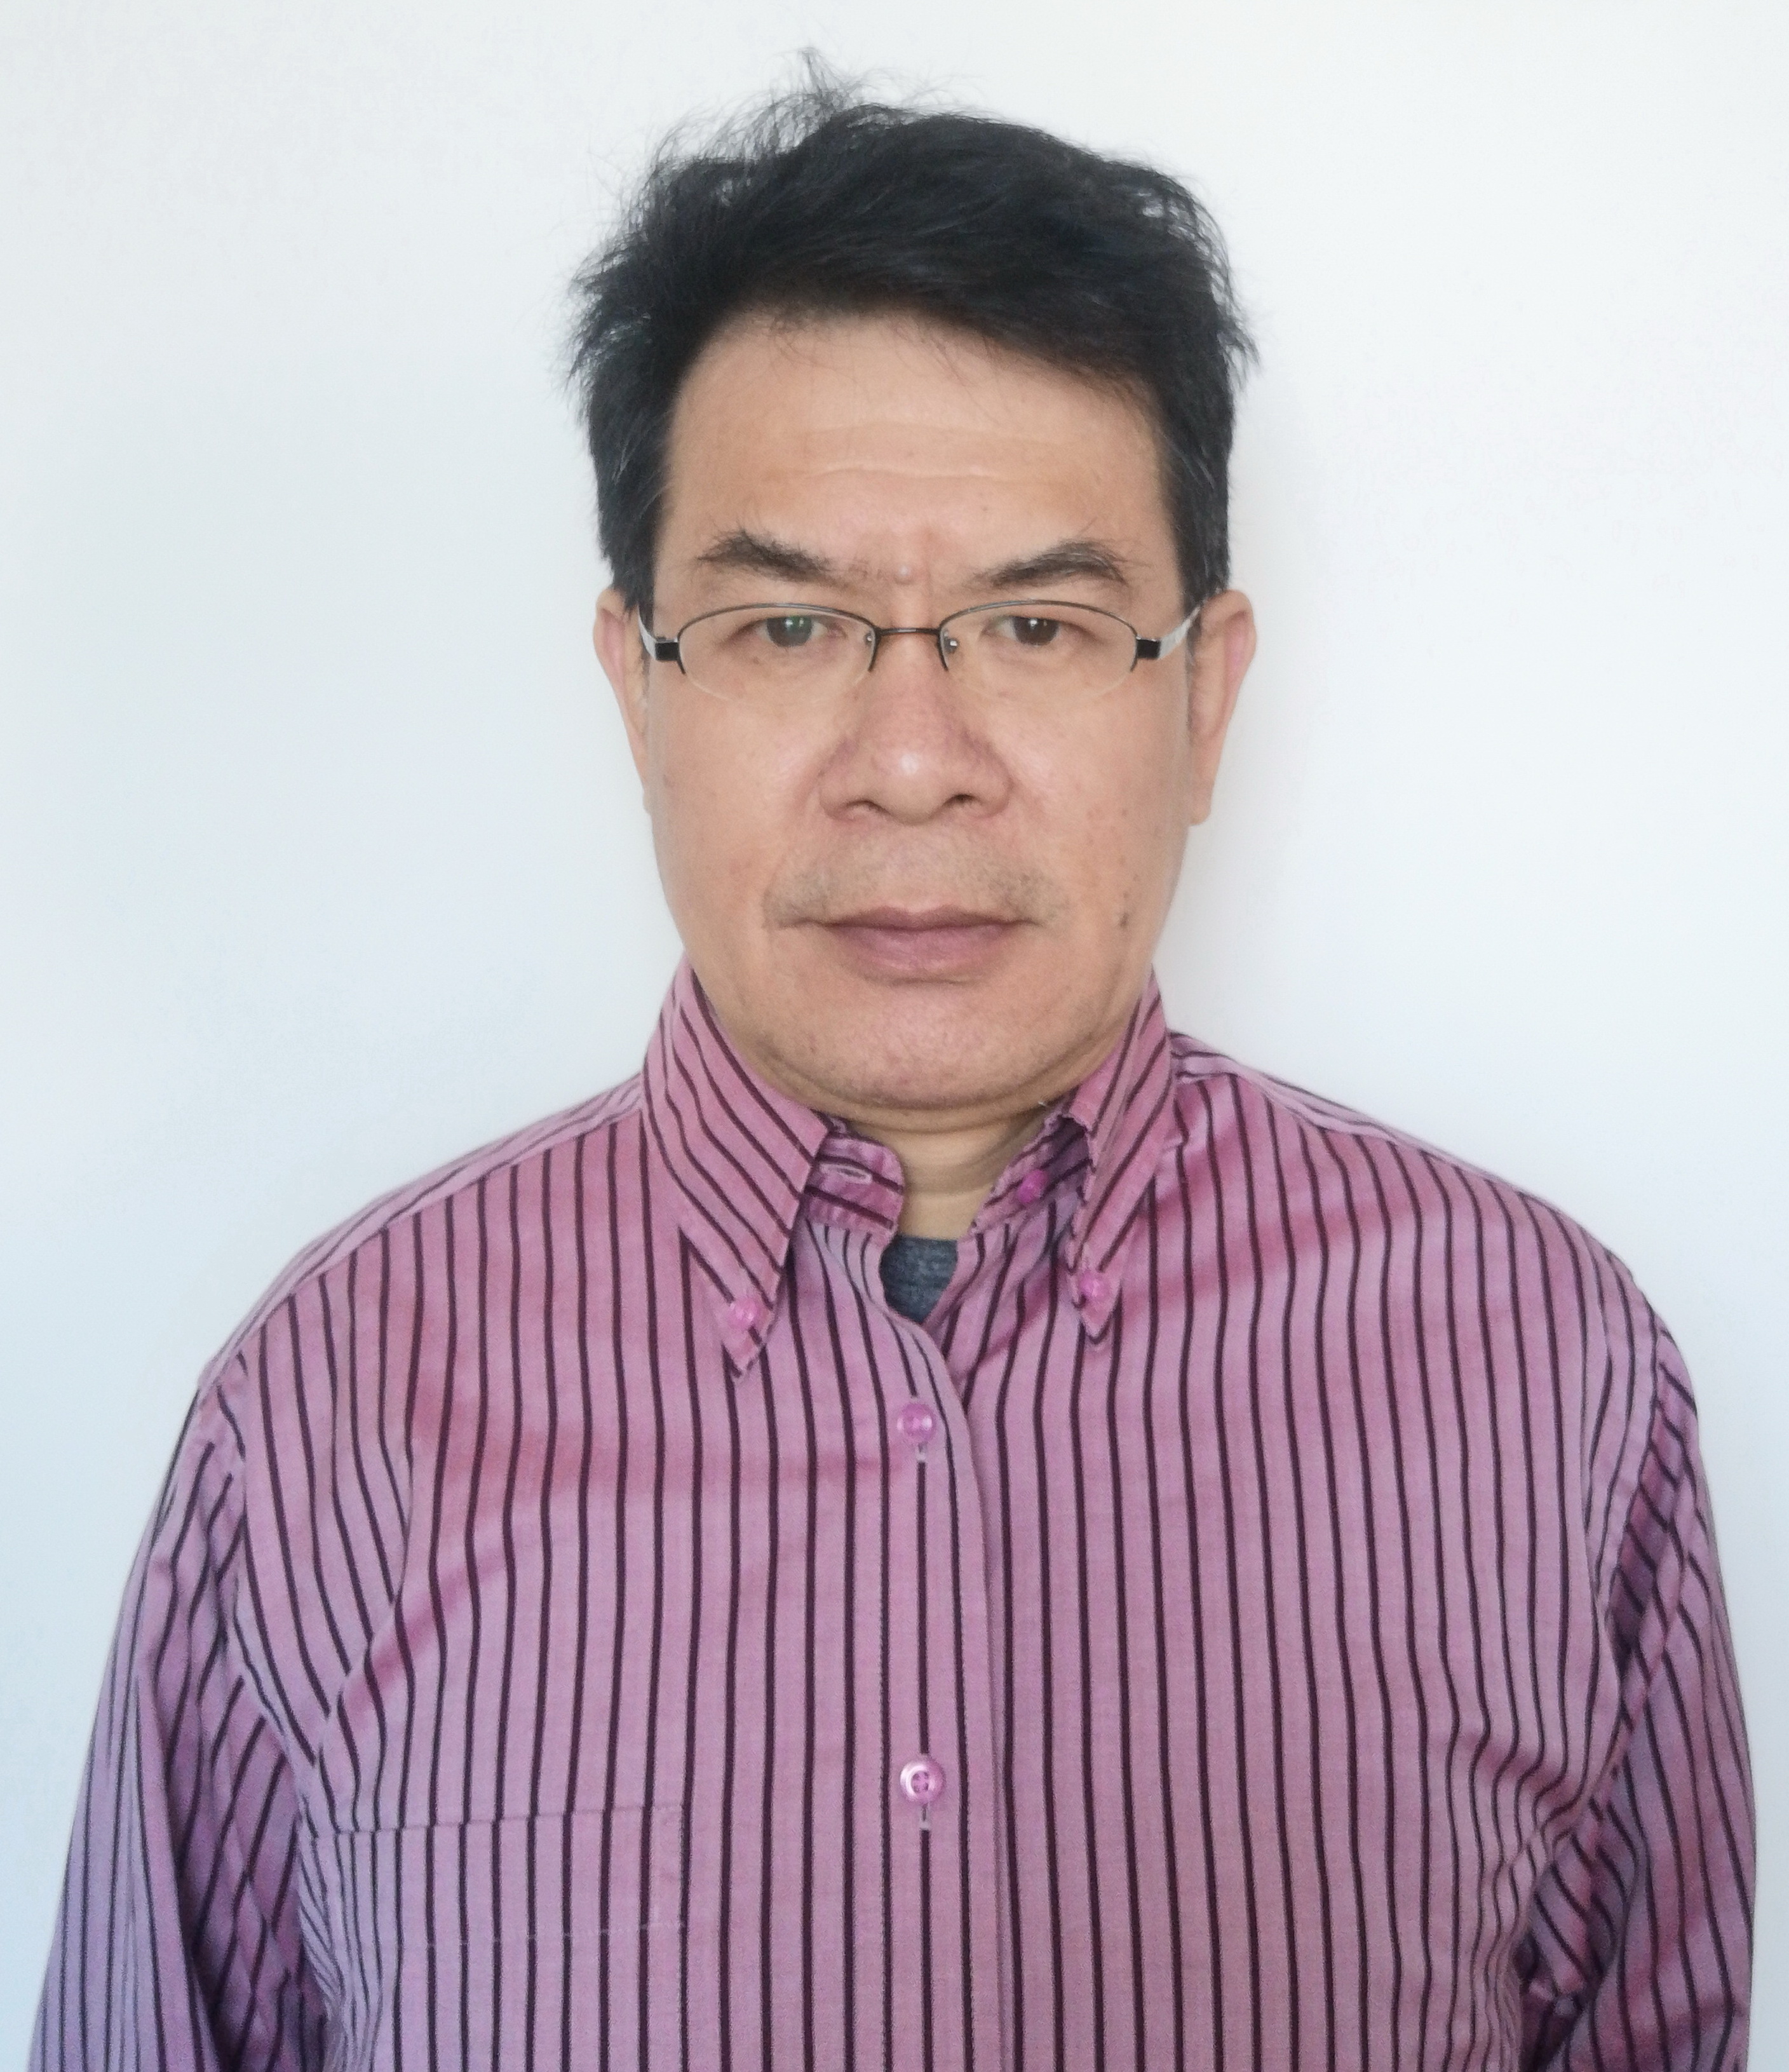 Mr. Li Erping,professor and doctoral supervisor at Kunming University of Science and Technology